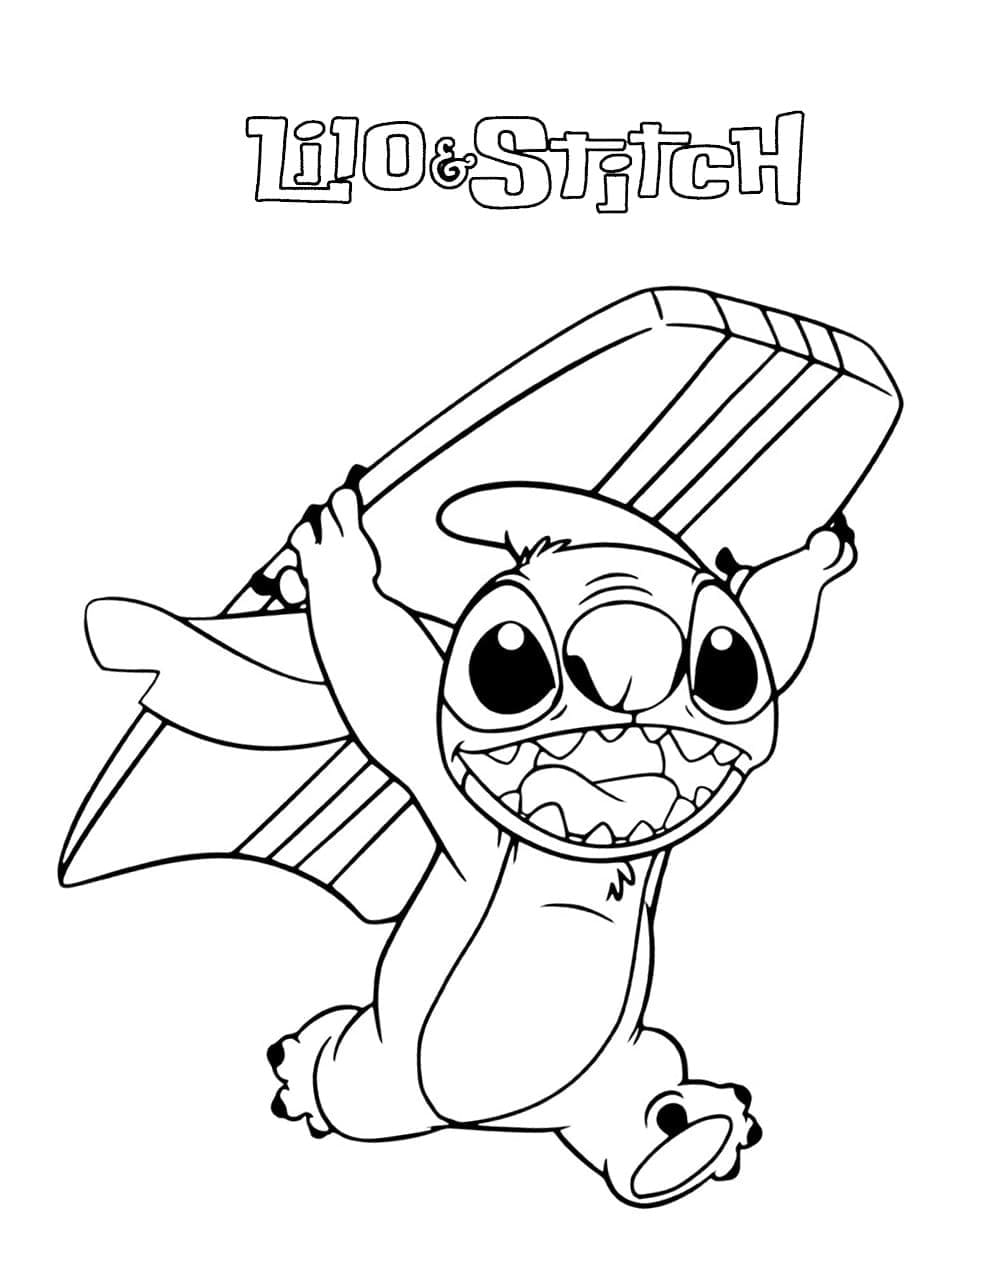 Stitch and surfboard coloring page